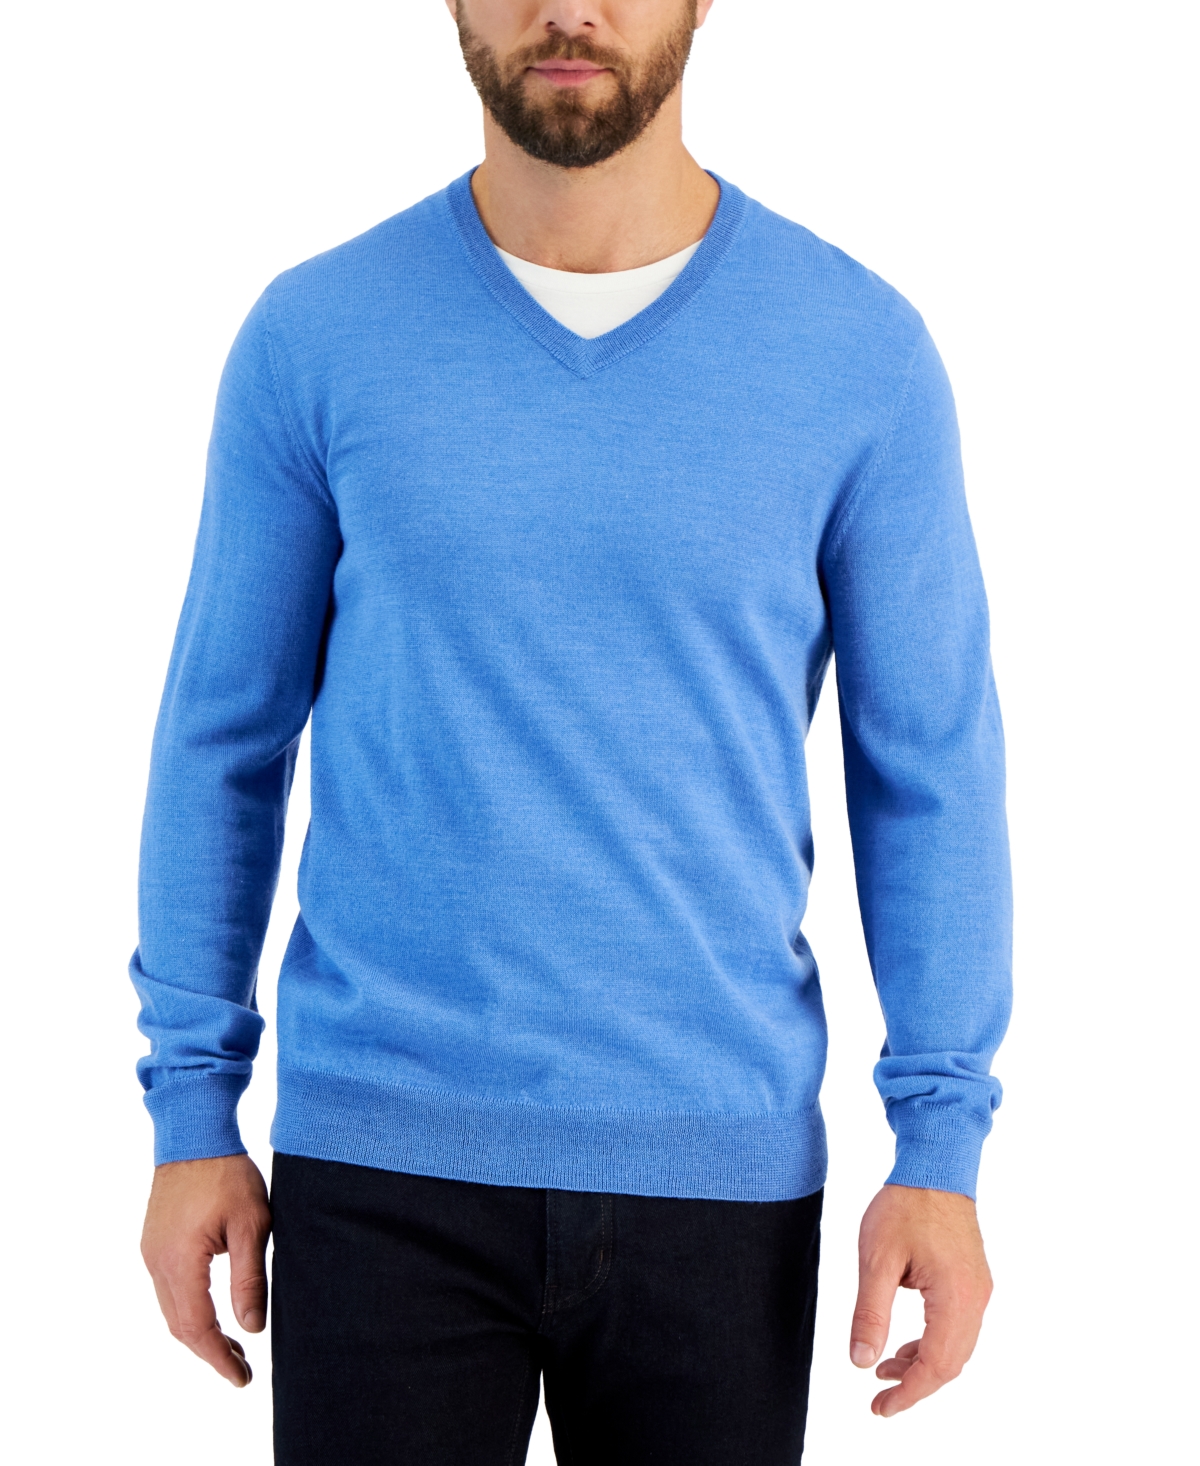 Men's Solid V-Neck Merino Wool Blend Sweater, Created for Macy's - Wedgewood Heather